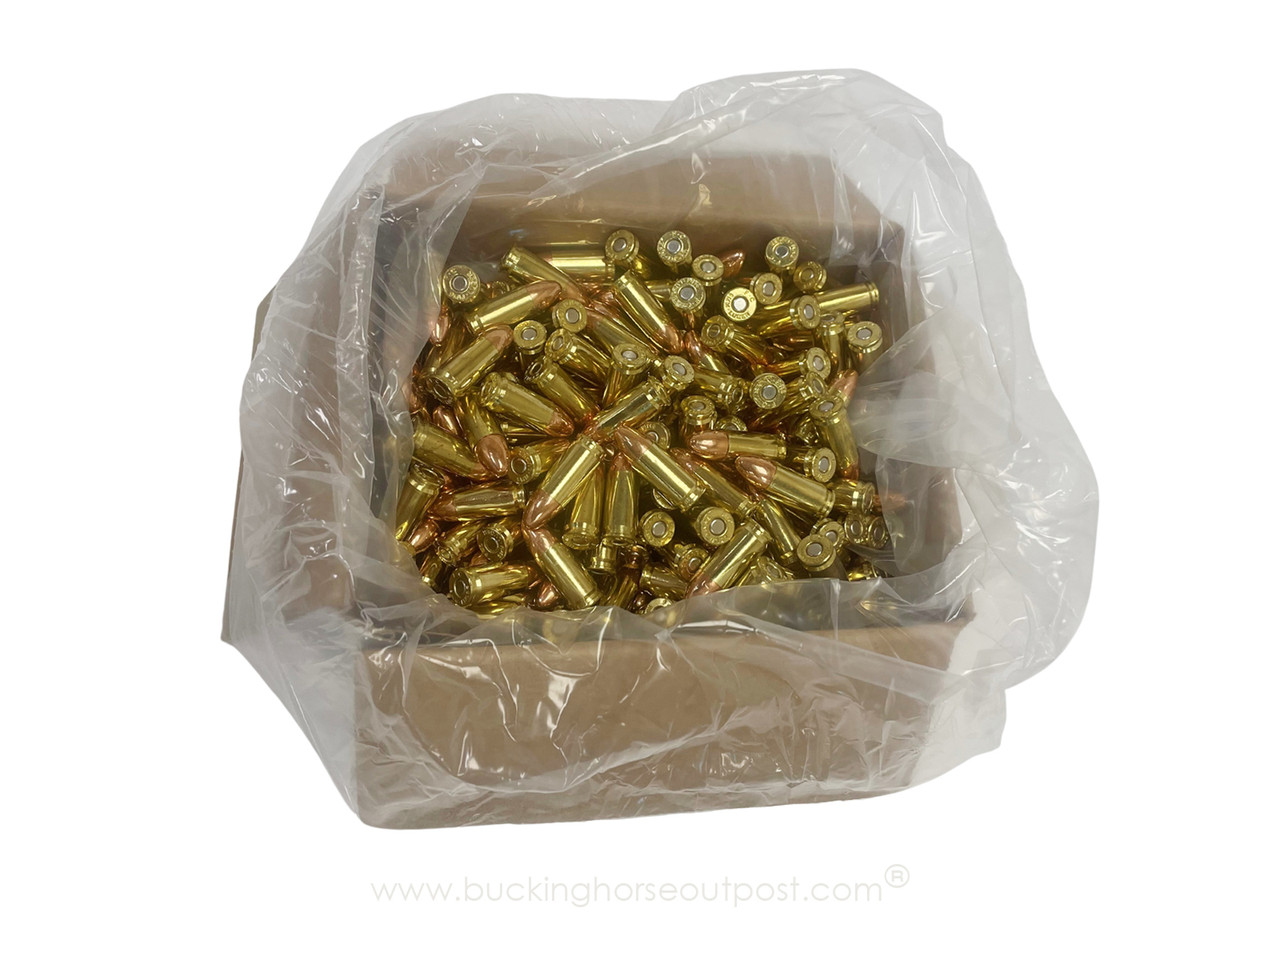 Federal 9MM 115 Grain Full Metal Jacket 500rds Loose Packed Per Case - FREE SHIPPING on orders over $175